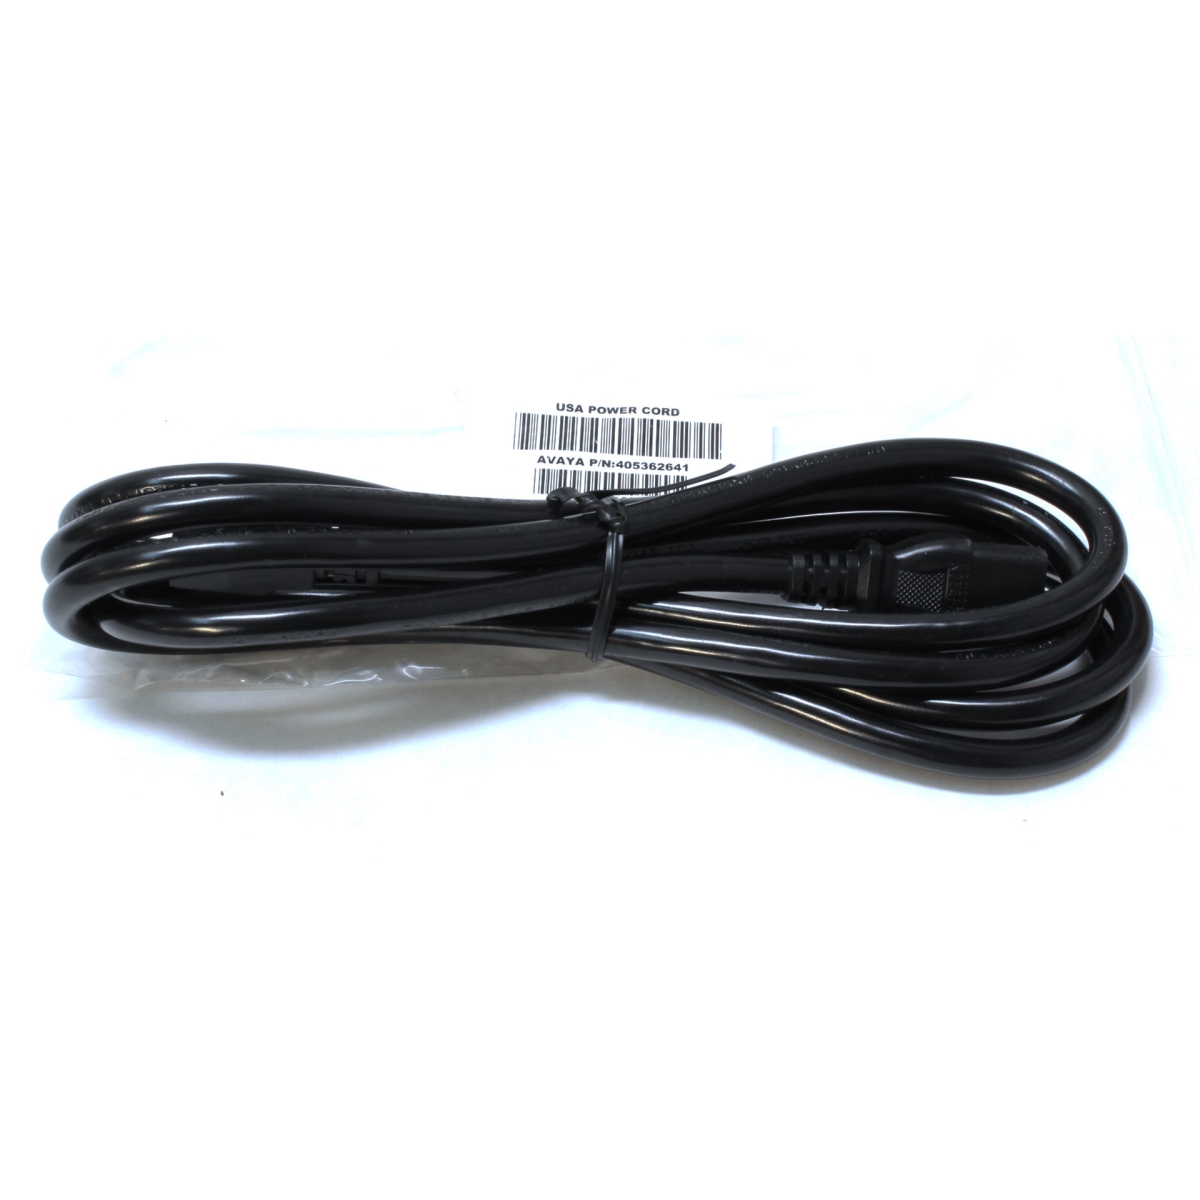 Picture of Avaya 405362641 8 ft. Standard Power Cord